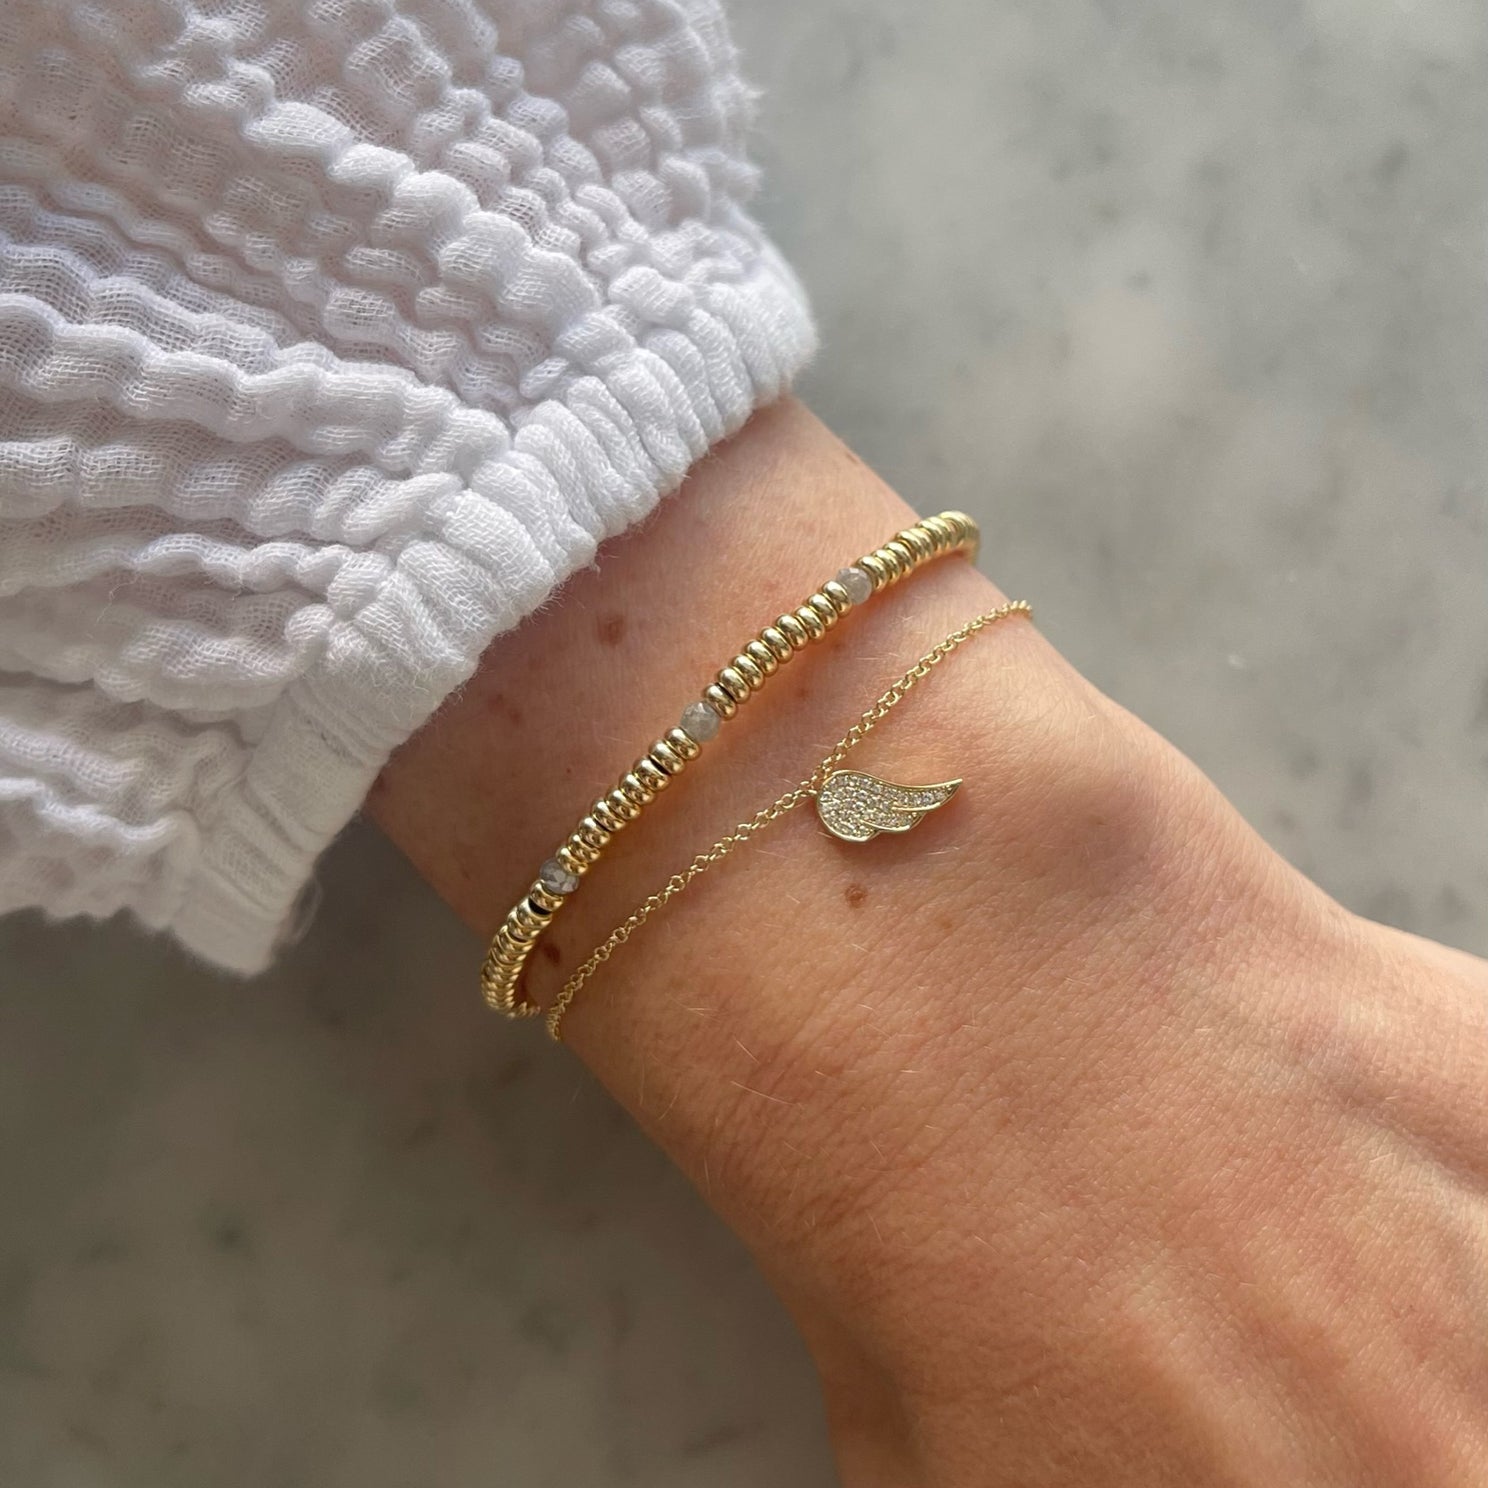 Birthstone Bead Bracelet In Diamond in 14k yellow gold styled next to angel wing bracelet on wrist of model with white sleeve